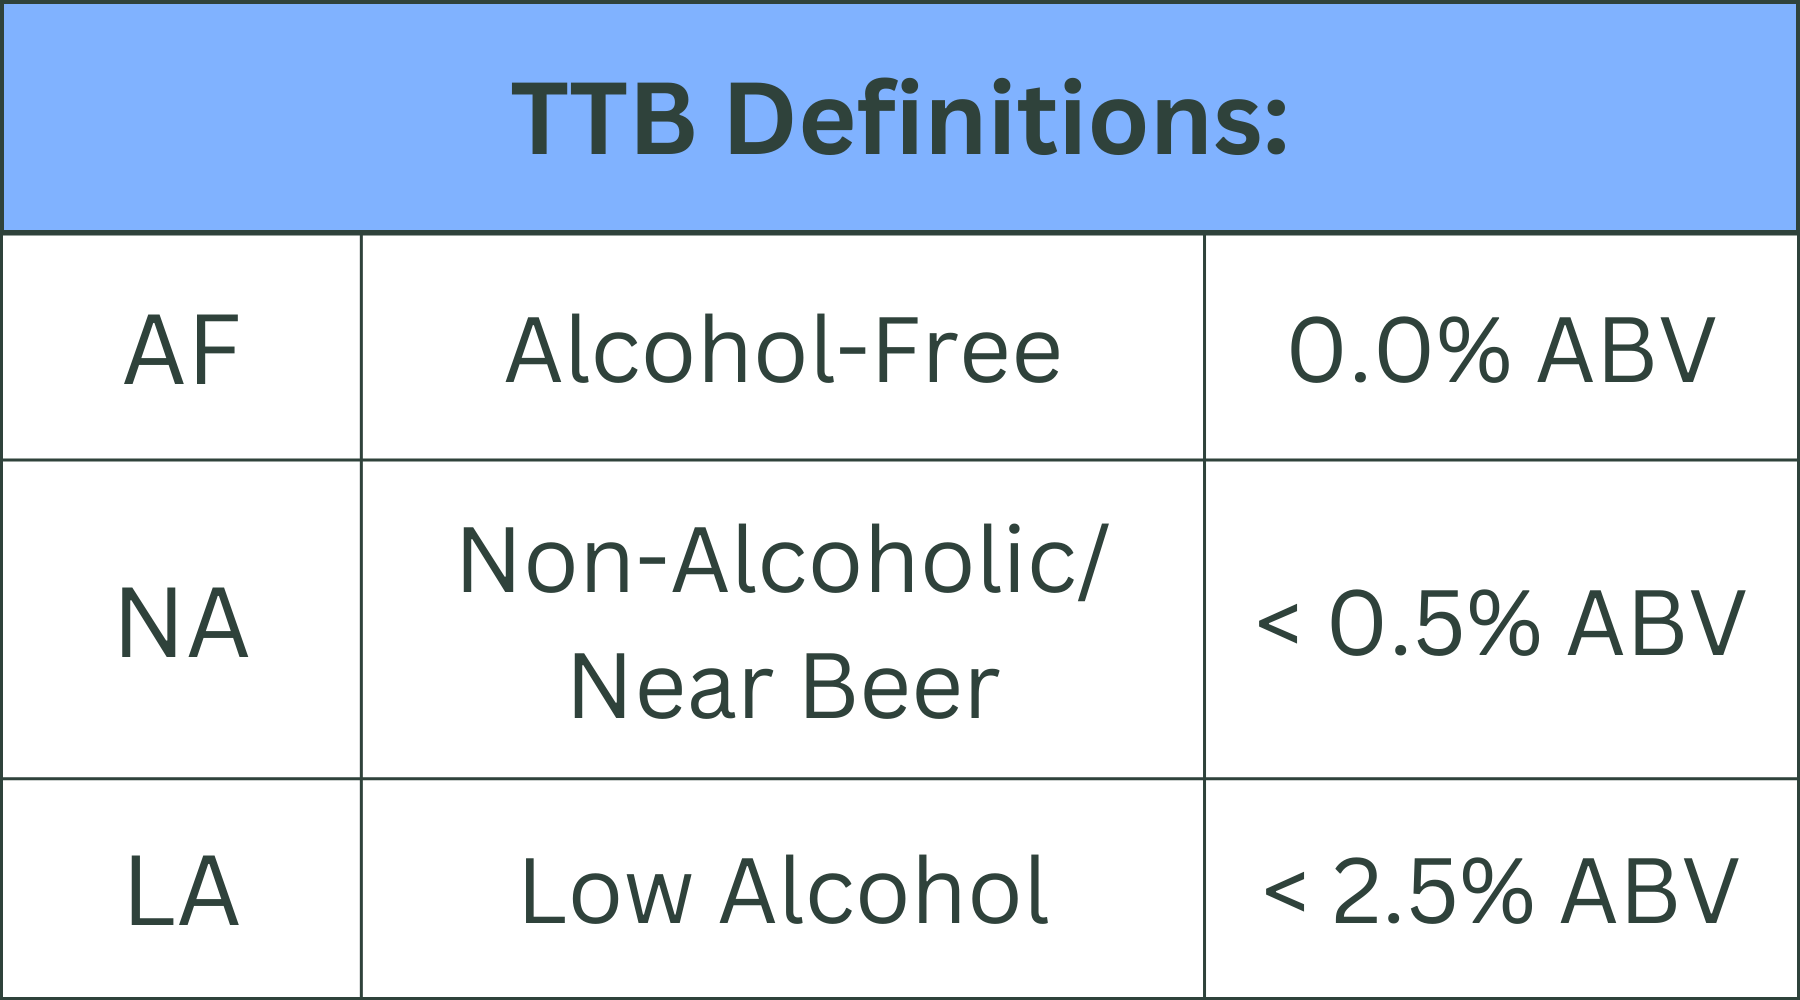 The Difference Between "Alcohol-Free" and "Non-Alcoholic"